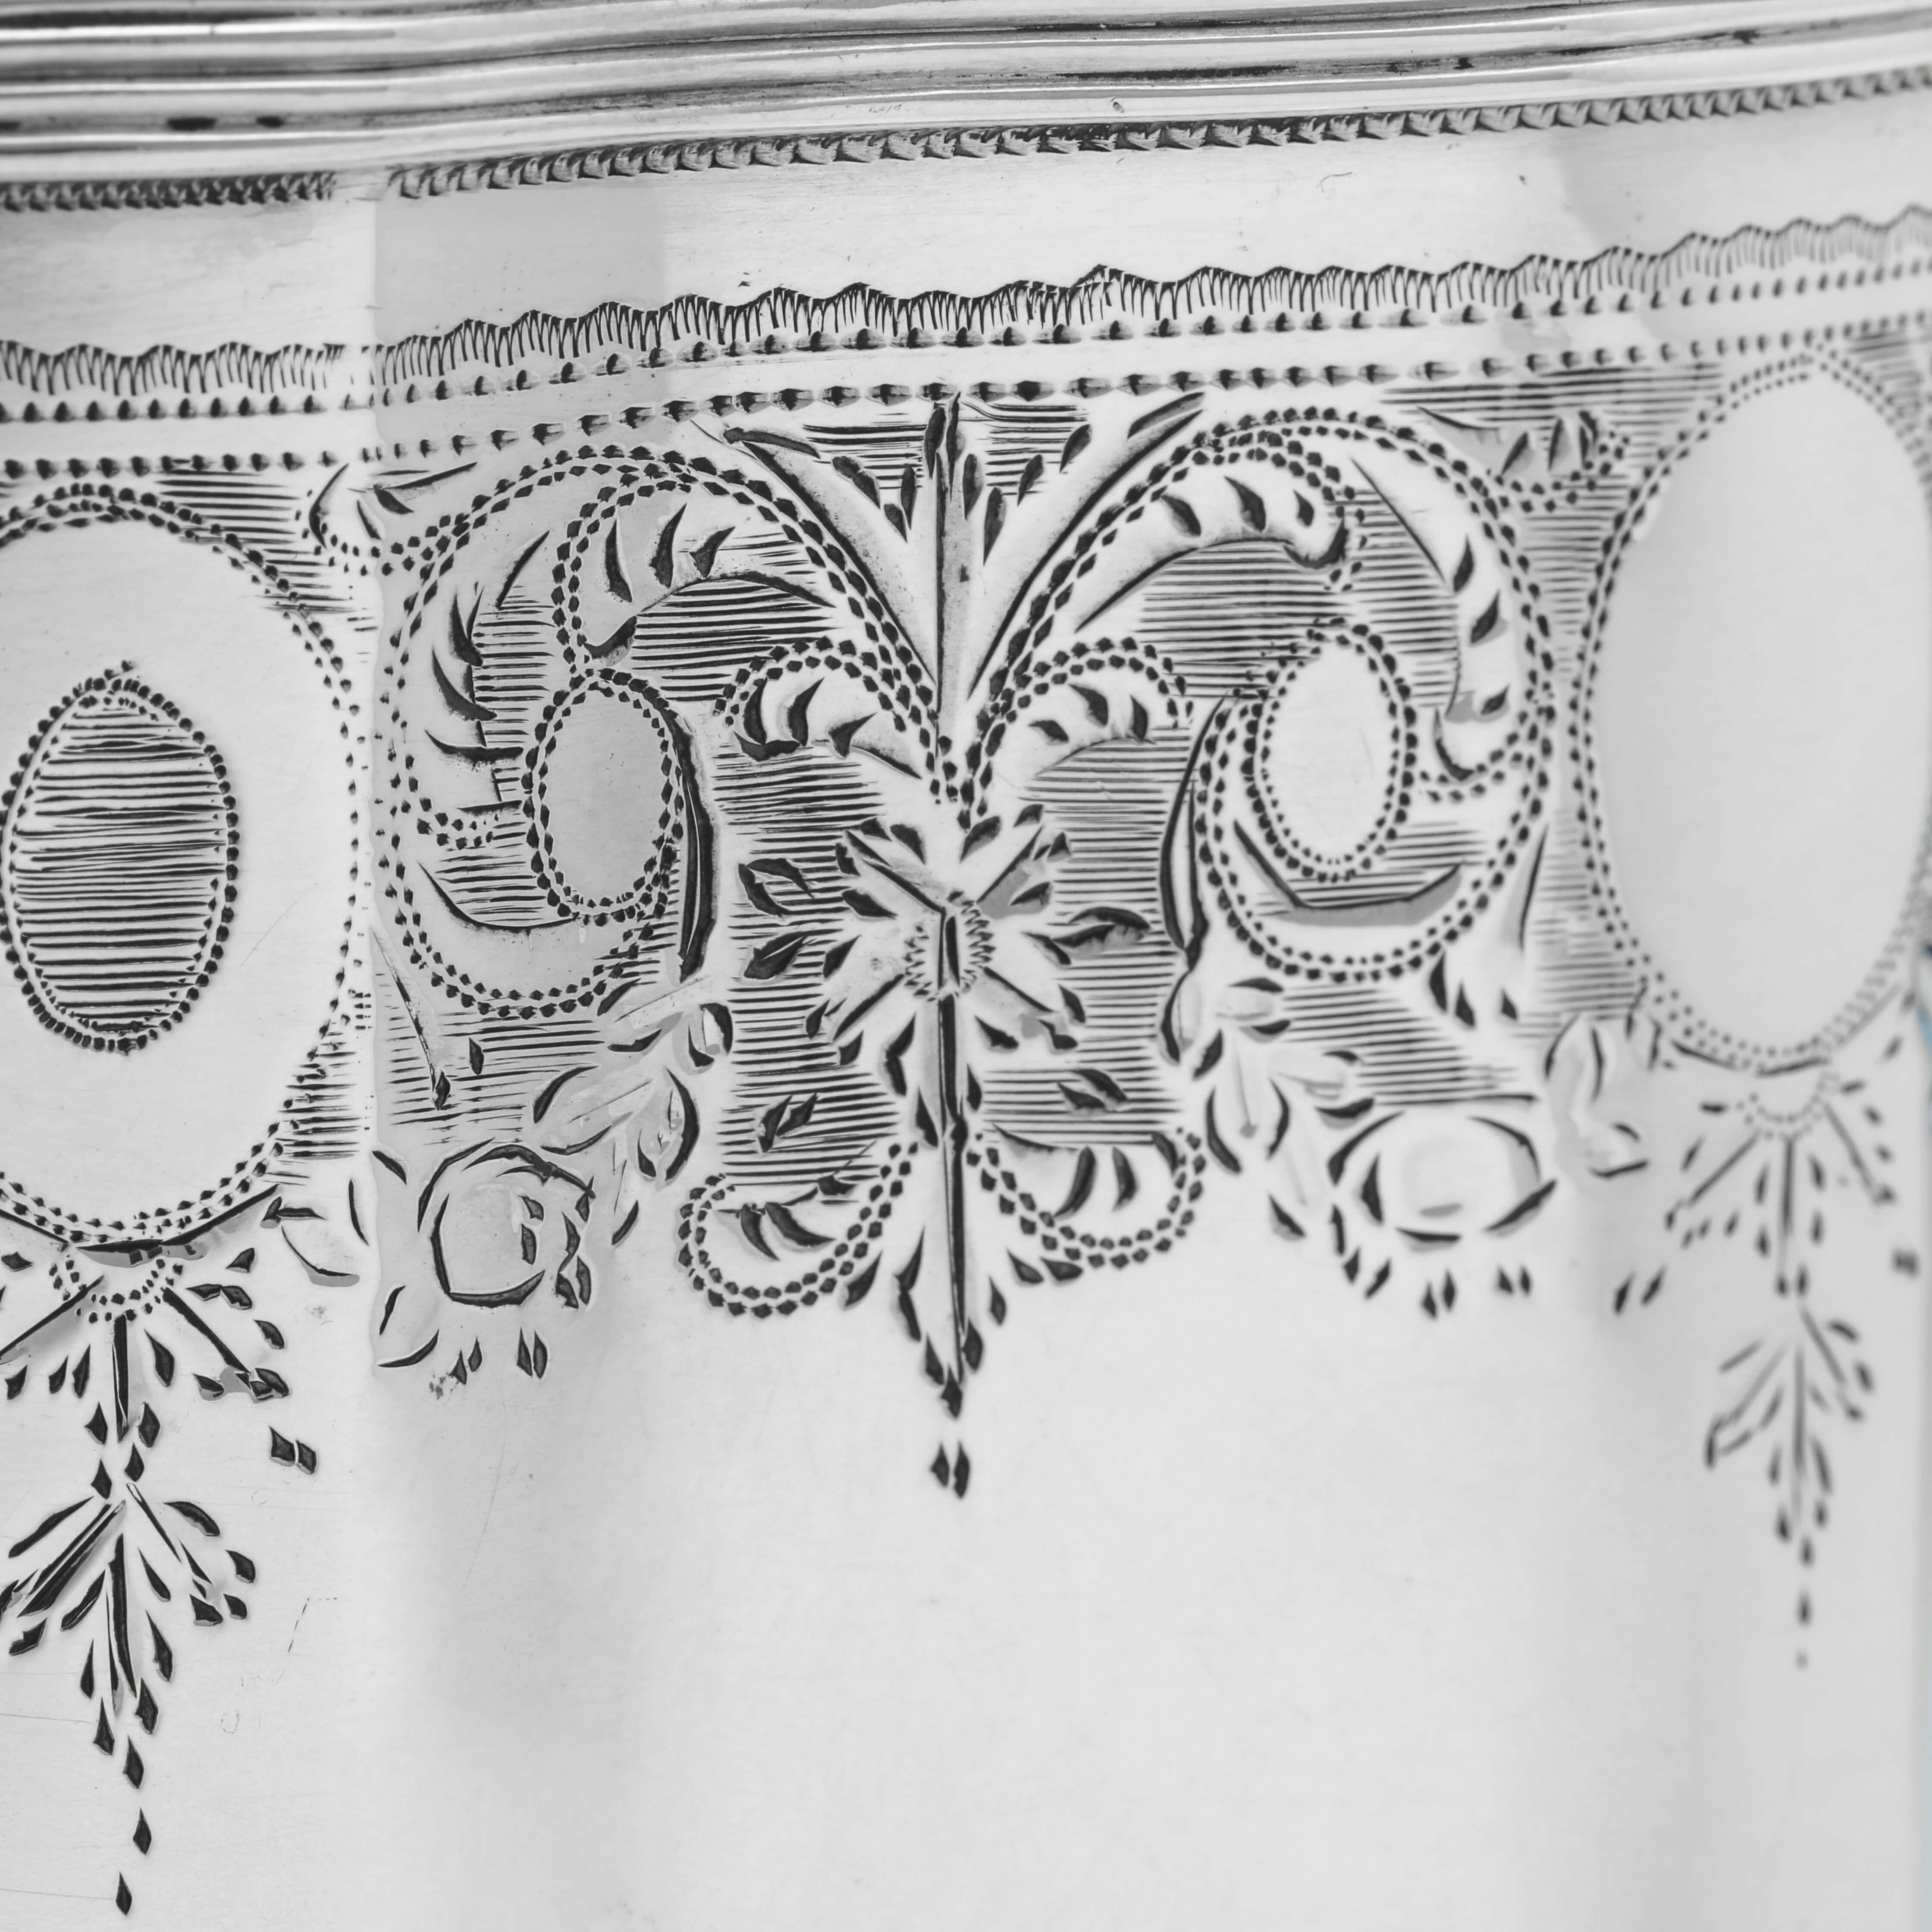 Neoclassical Revival Silver Tea Caddy. The collection of U.S. President Cleveland and his descendants